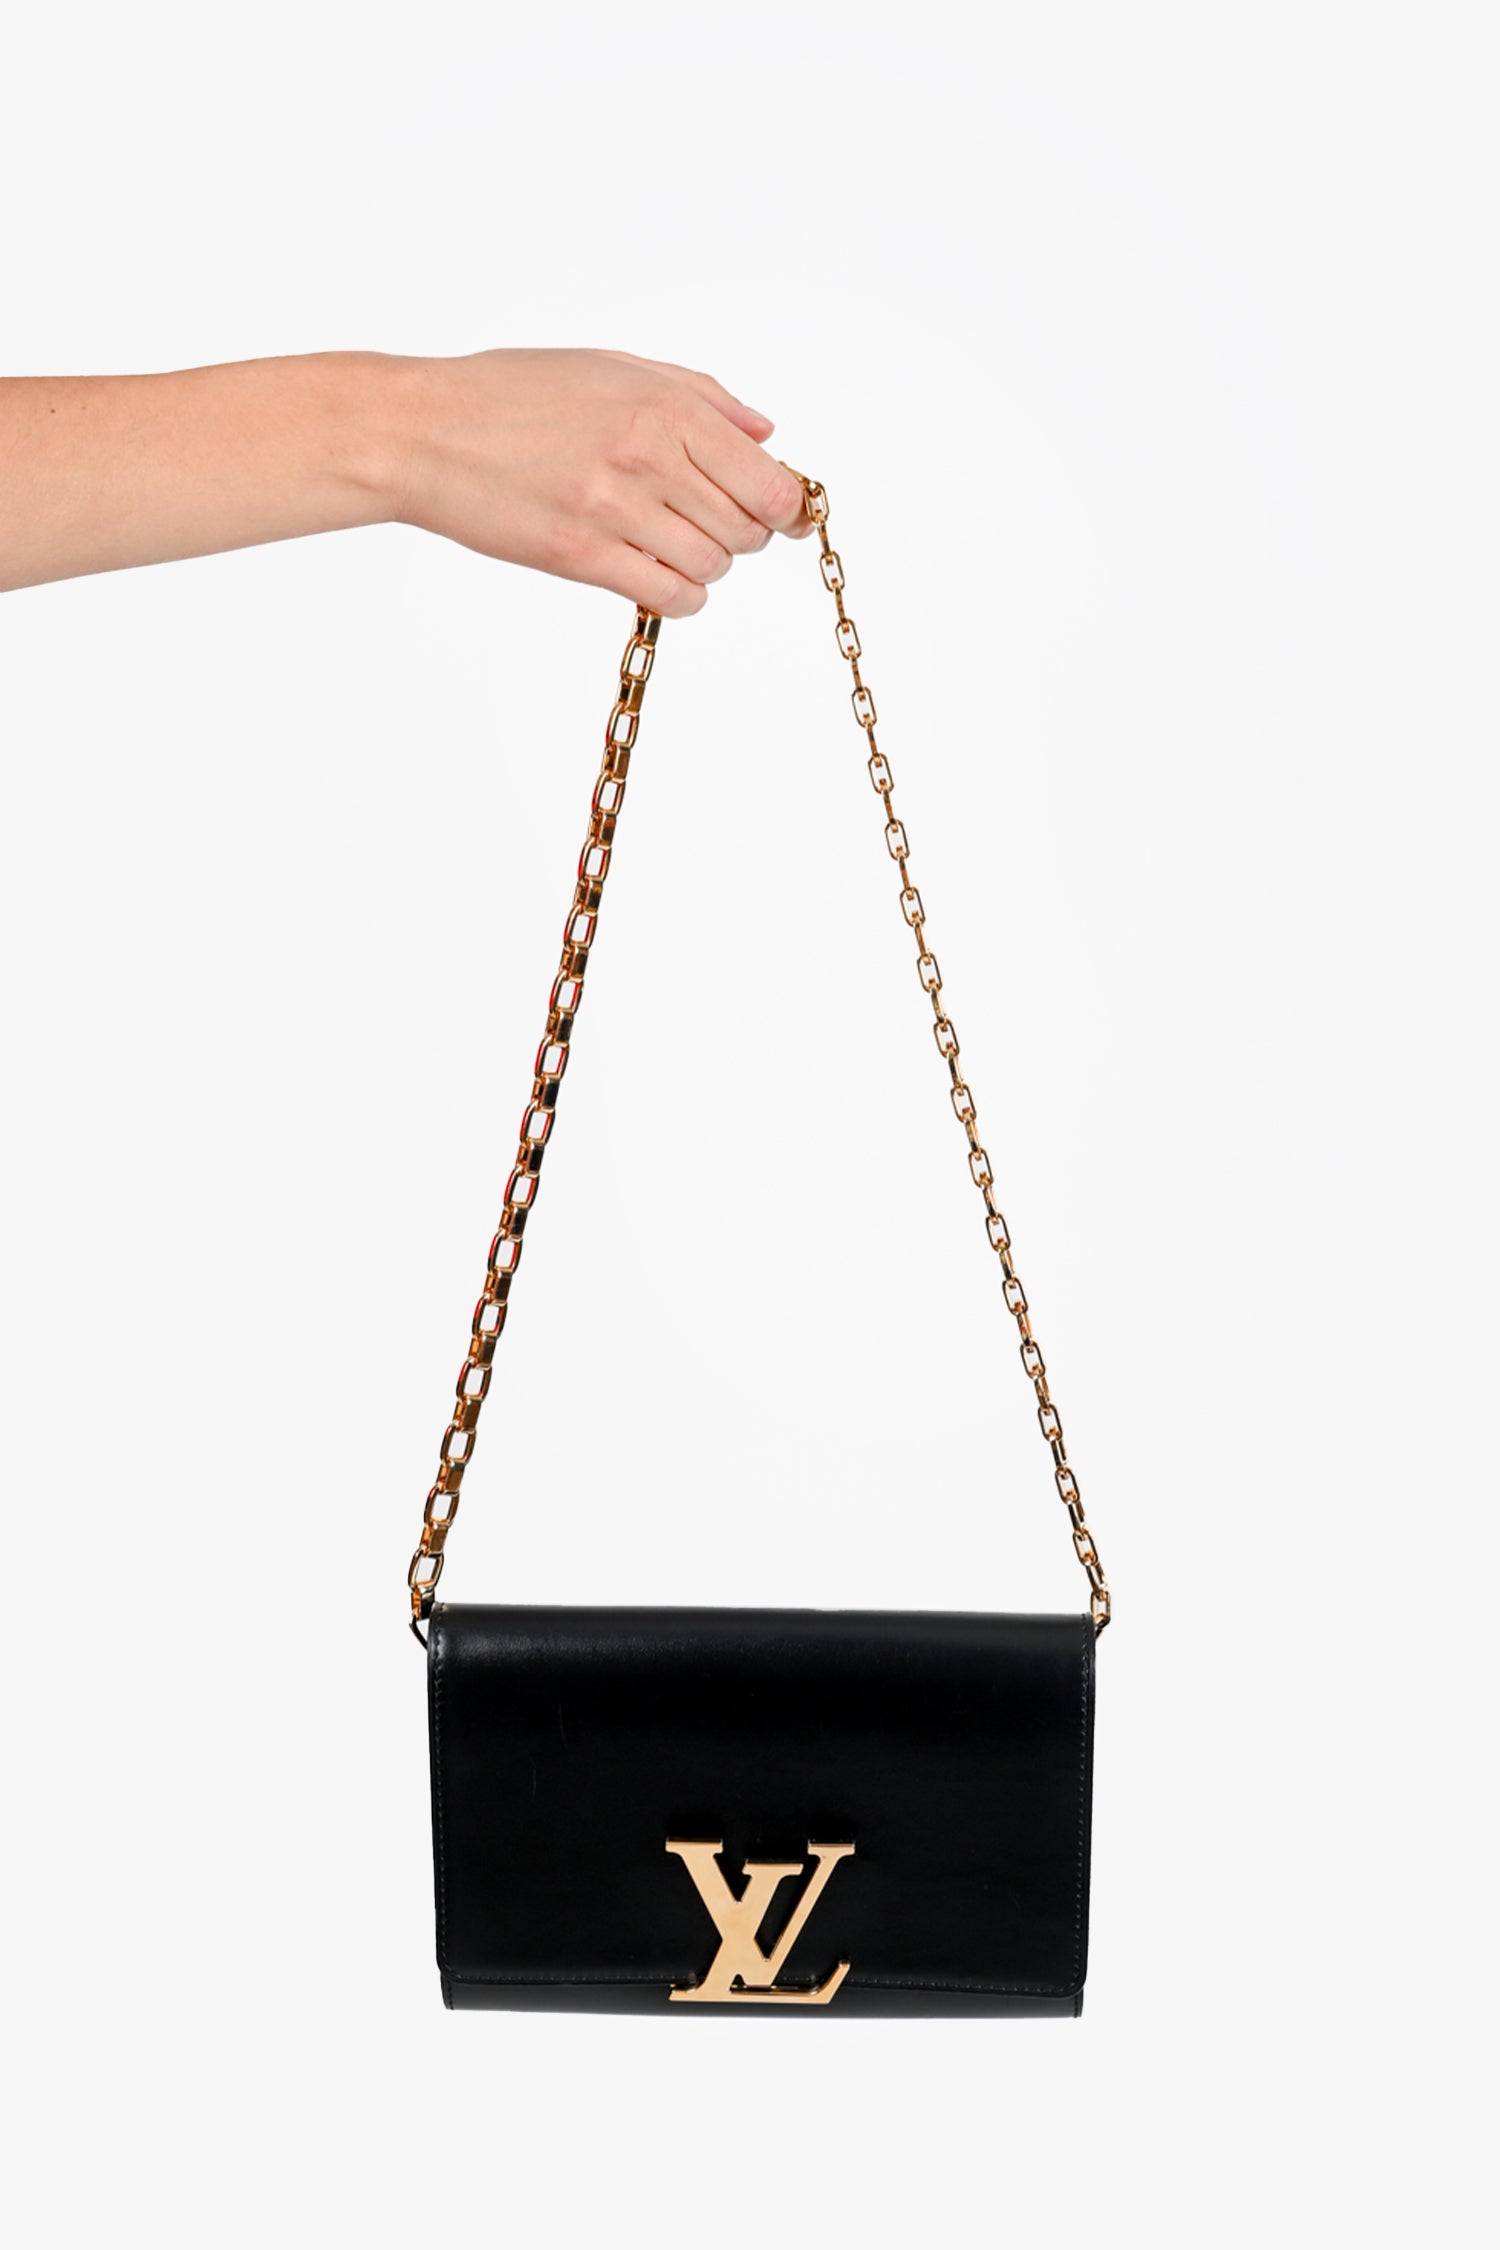 Louis Vuitton Black Smooth Leather 'Louise' Clutch with Gold Chain